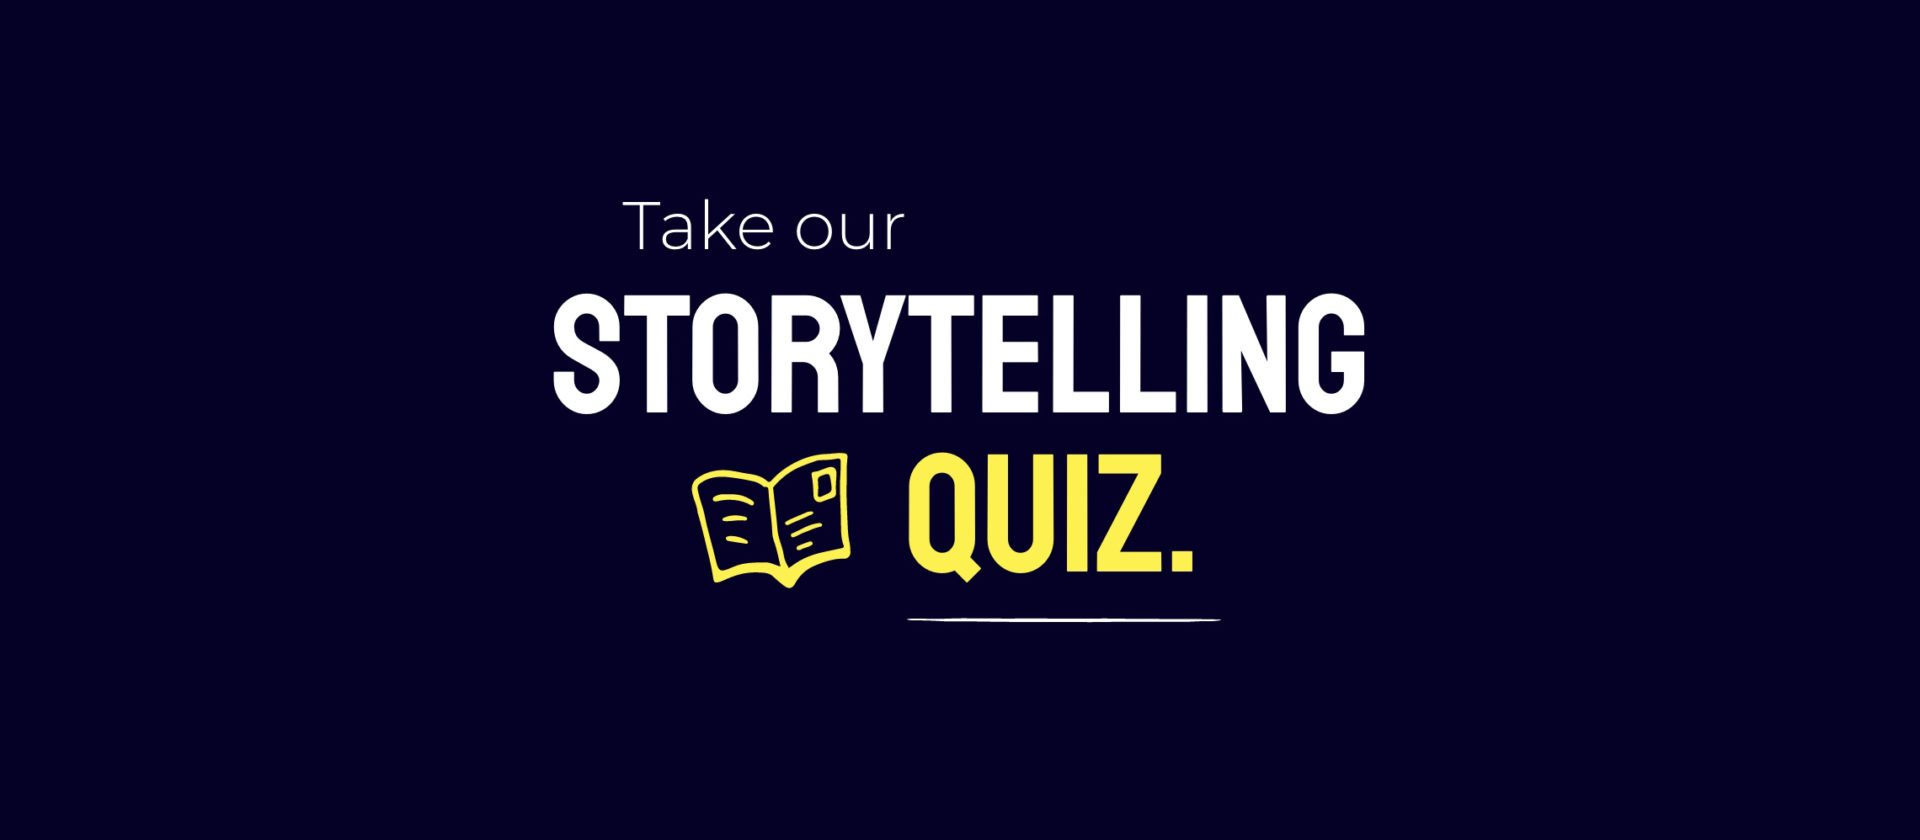 Storytelling quiz: how powerful is your persuasive prowess? 